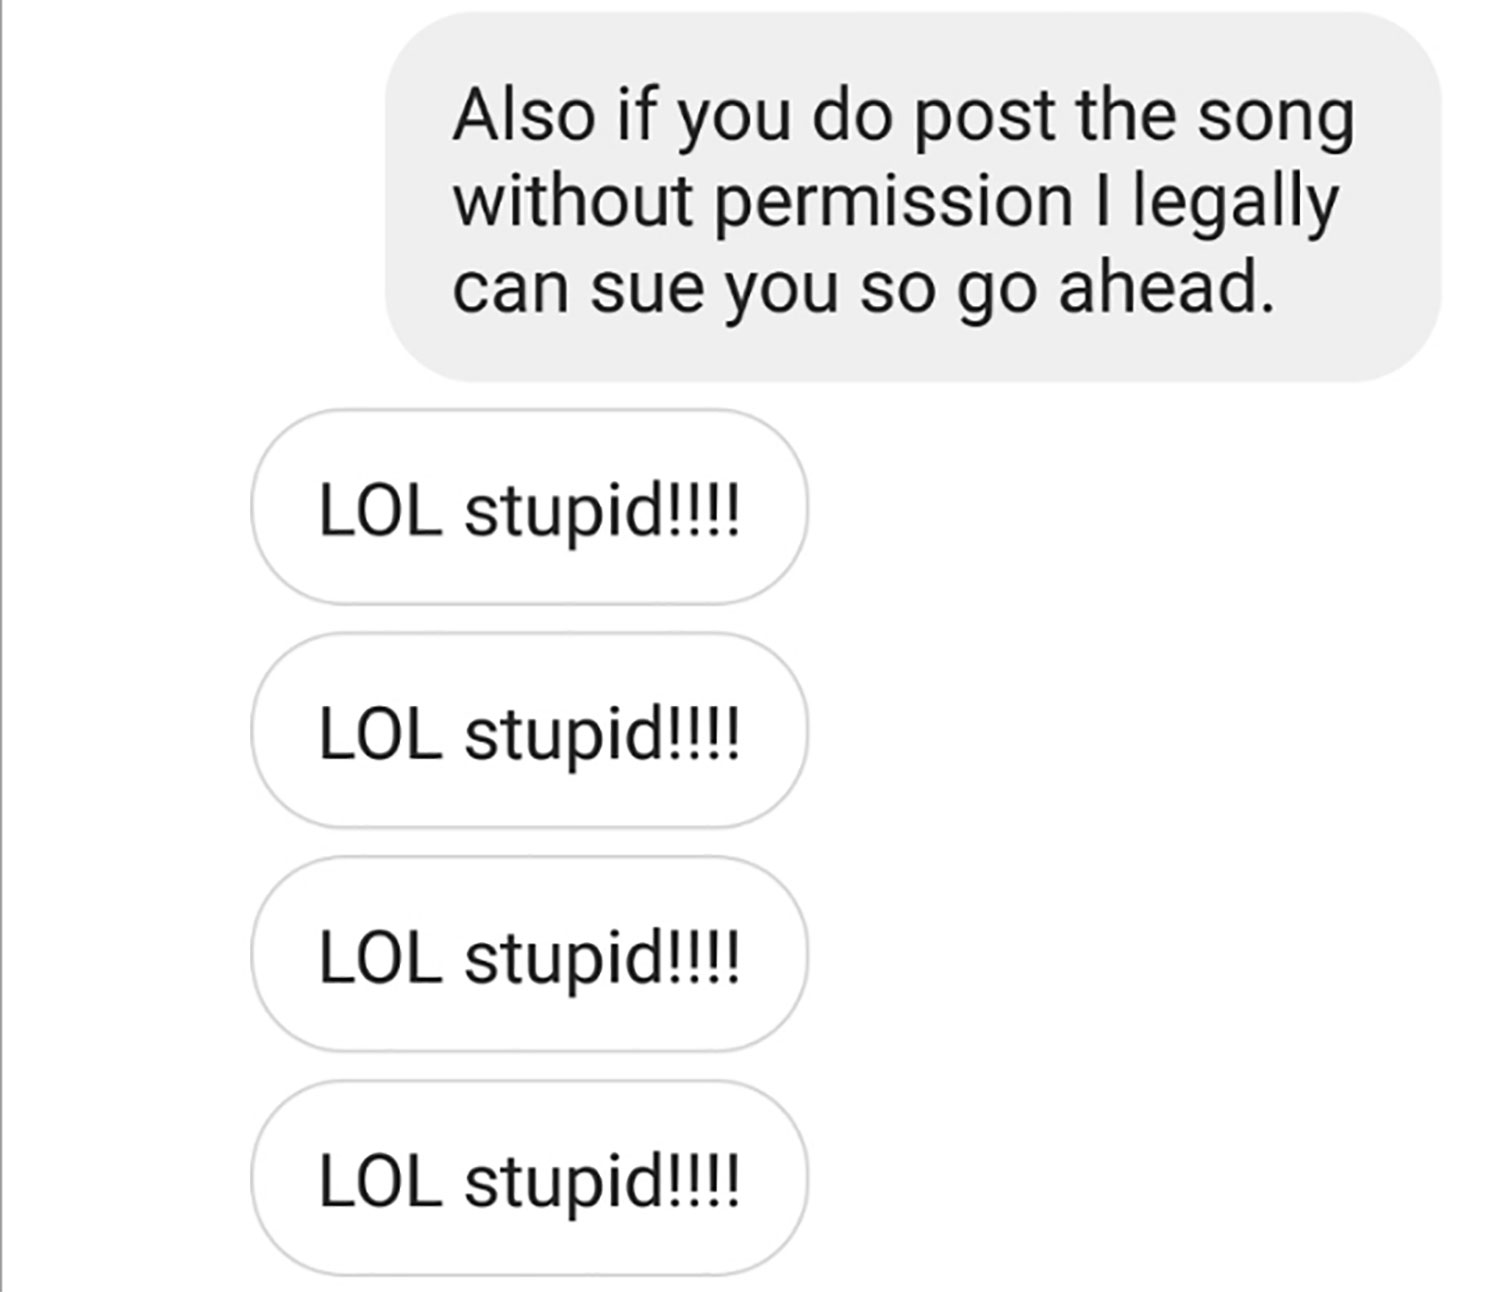 organization - Also if you do post the song without permission I legally can sue you so go ahead. Lol stupid!!!! Lol stupid!!!! Lol stupid!!!! Lol stupid!!!!